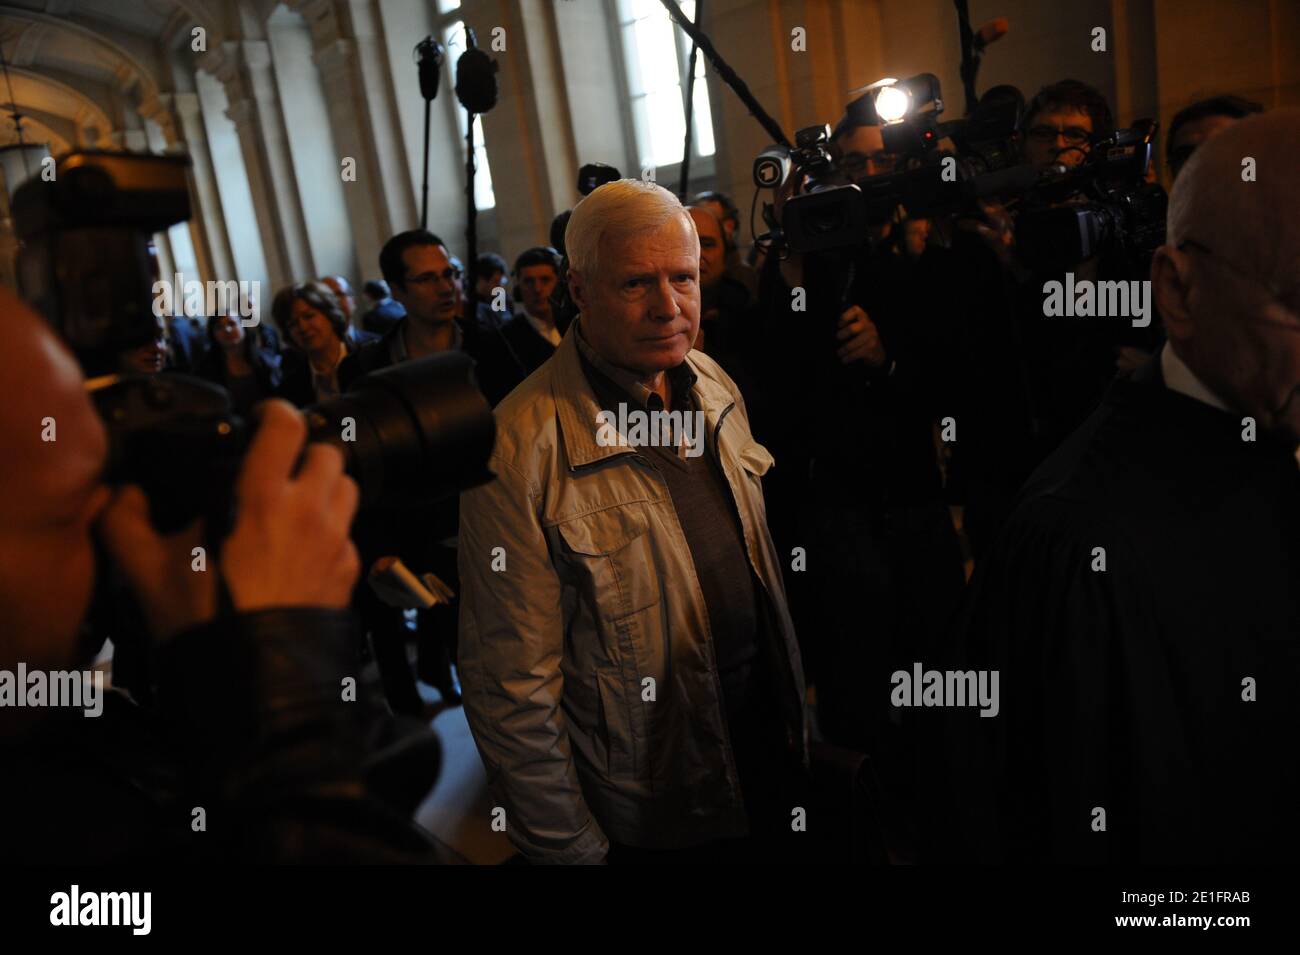 Frenchman Andre Bamberski arrives at the Palais de Justice to attend German cardiologist Dieter Krombach's trial for the murder of Kalinka Bamberski, in Paris, France on March 29, 2011. The German doctor is accused of having raped and killed his then 14-year-old stepdaughter, Kalinka Bamberski, in the summer of 1982 while she was holidaying with her mother at Krombach's home at Lake Constance, southern Germany. A court in Germany ruled that Krombach could not be held responsible for the death, but in 1995 a court in Paris found the doctor guilty of manslaughter and sentenced him in absentia to Stock Photo